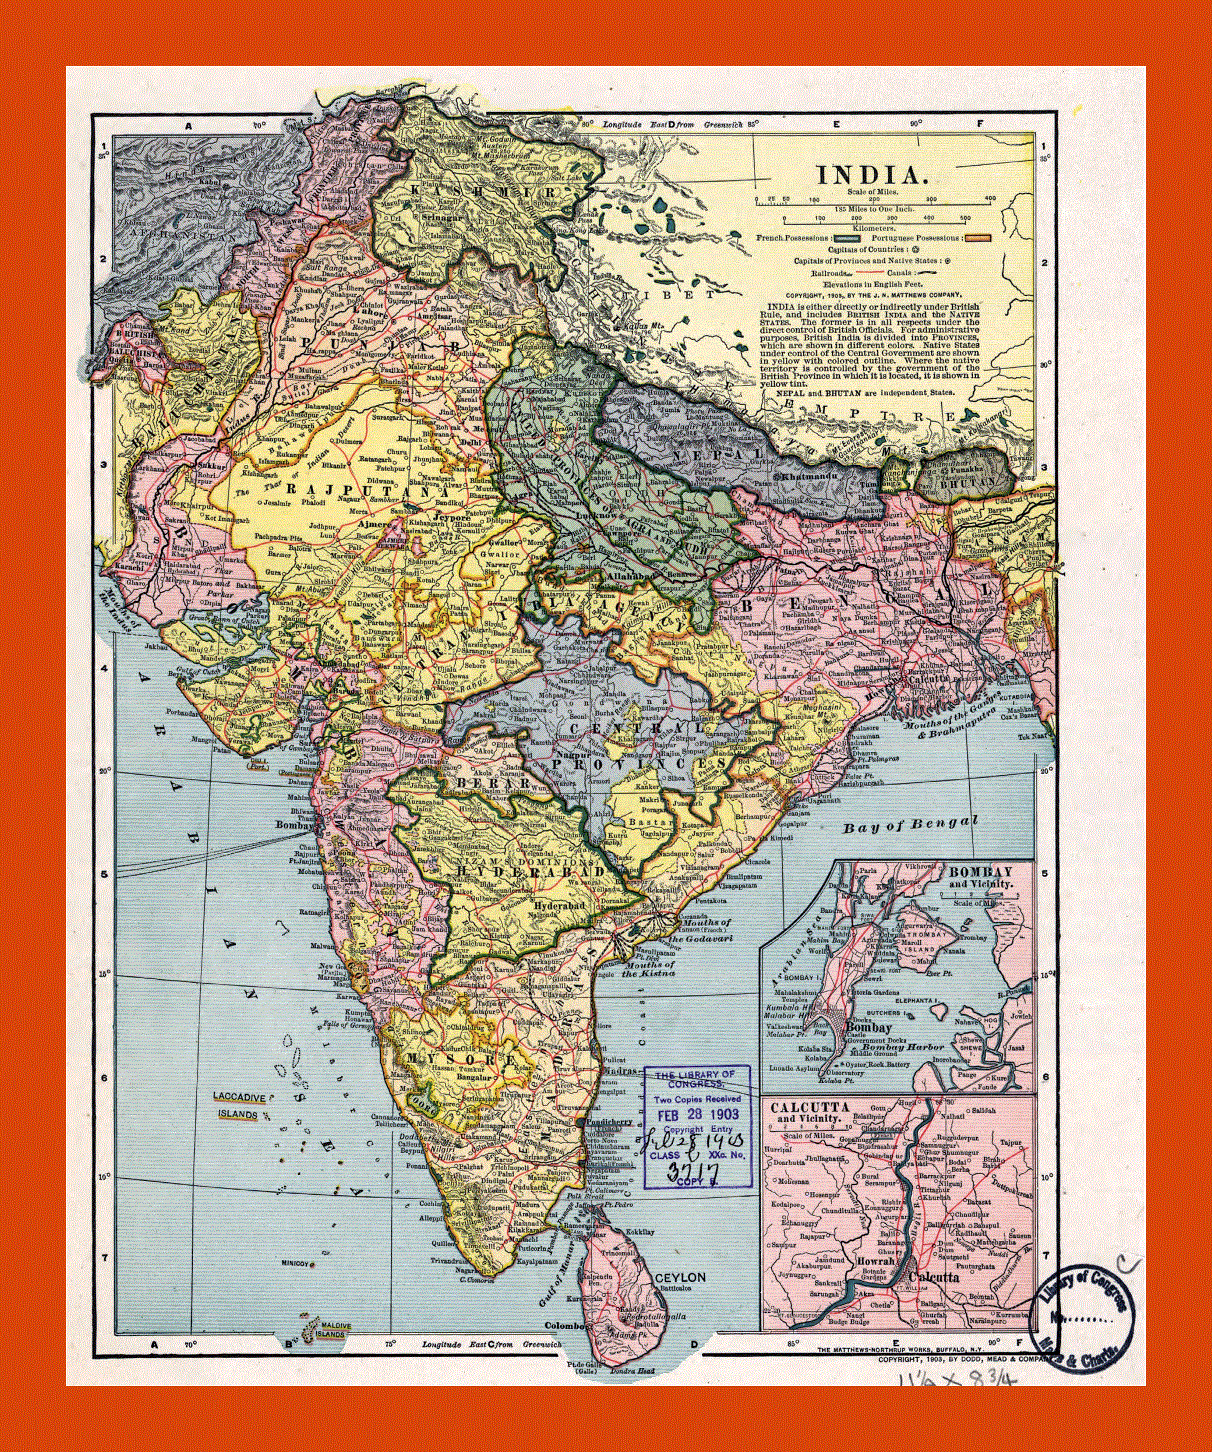 Old political and administrative map of India